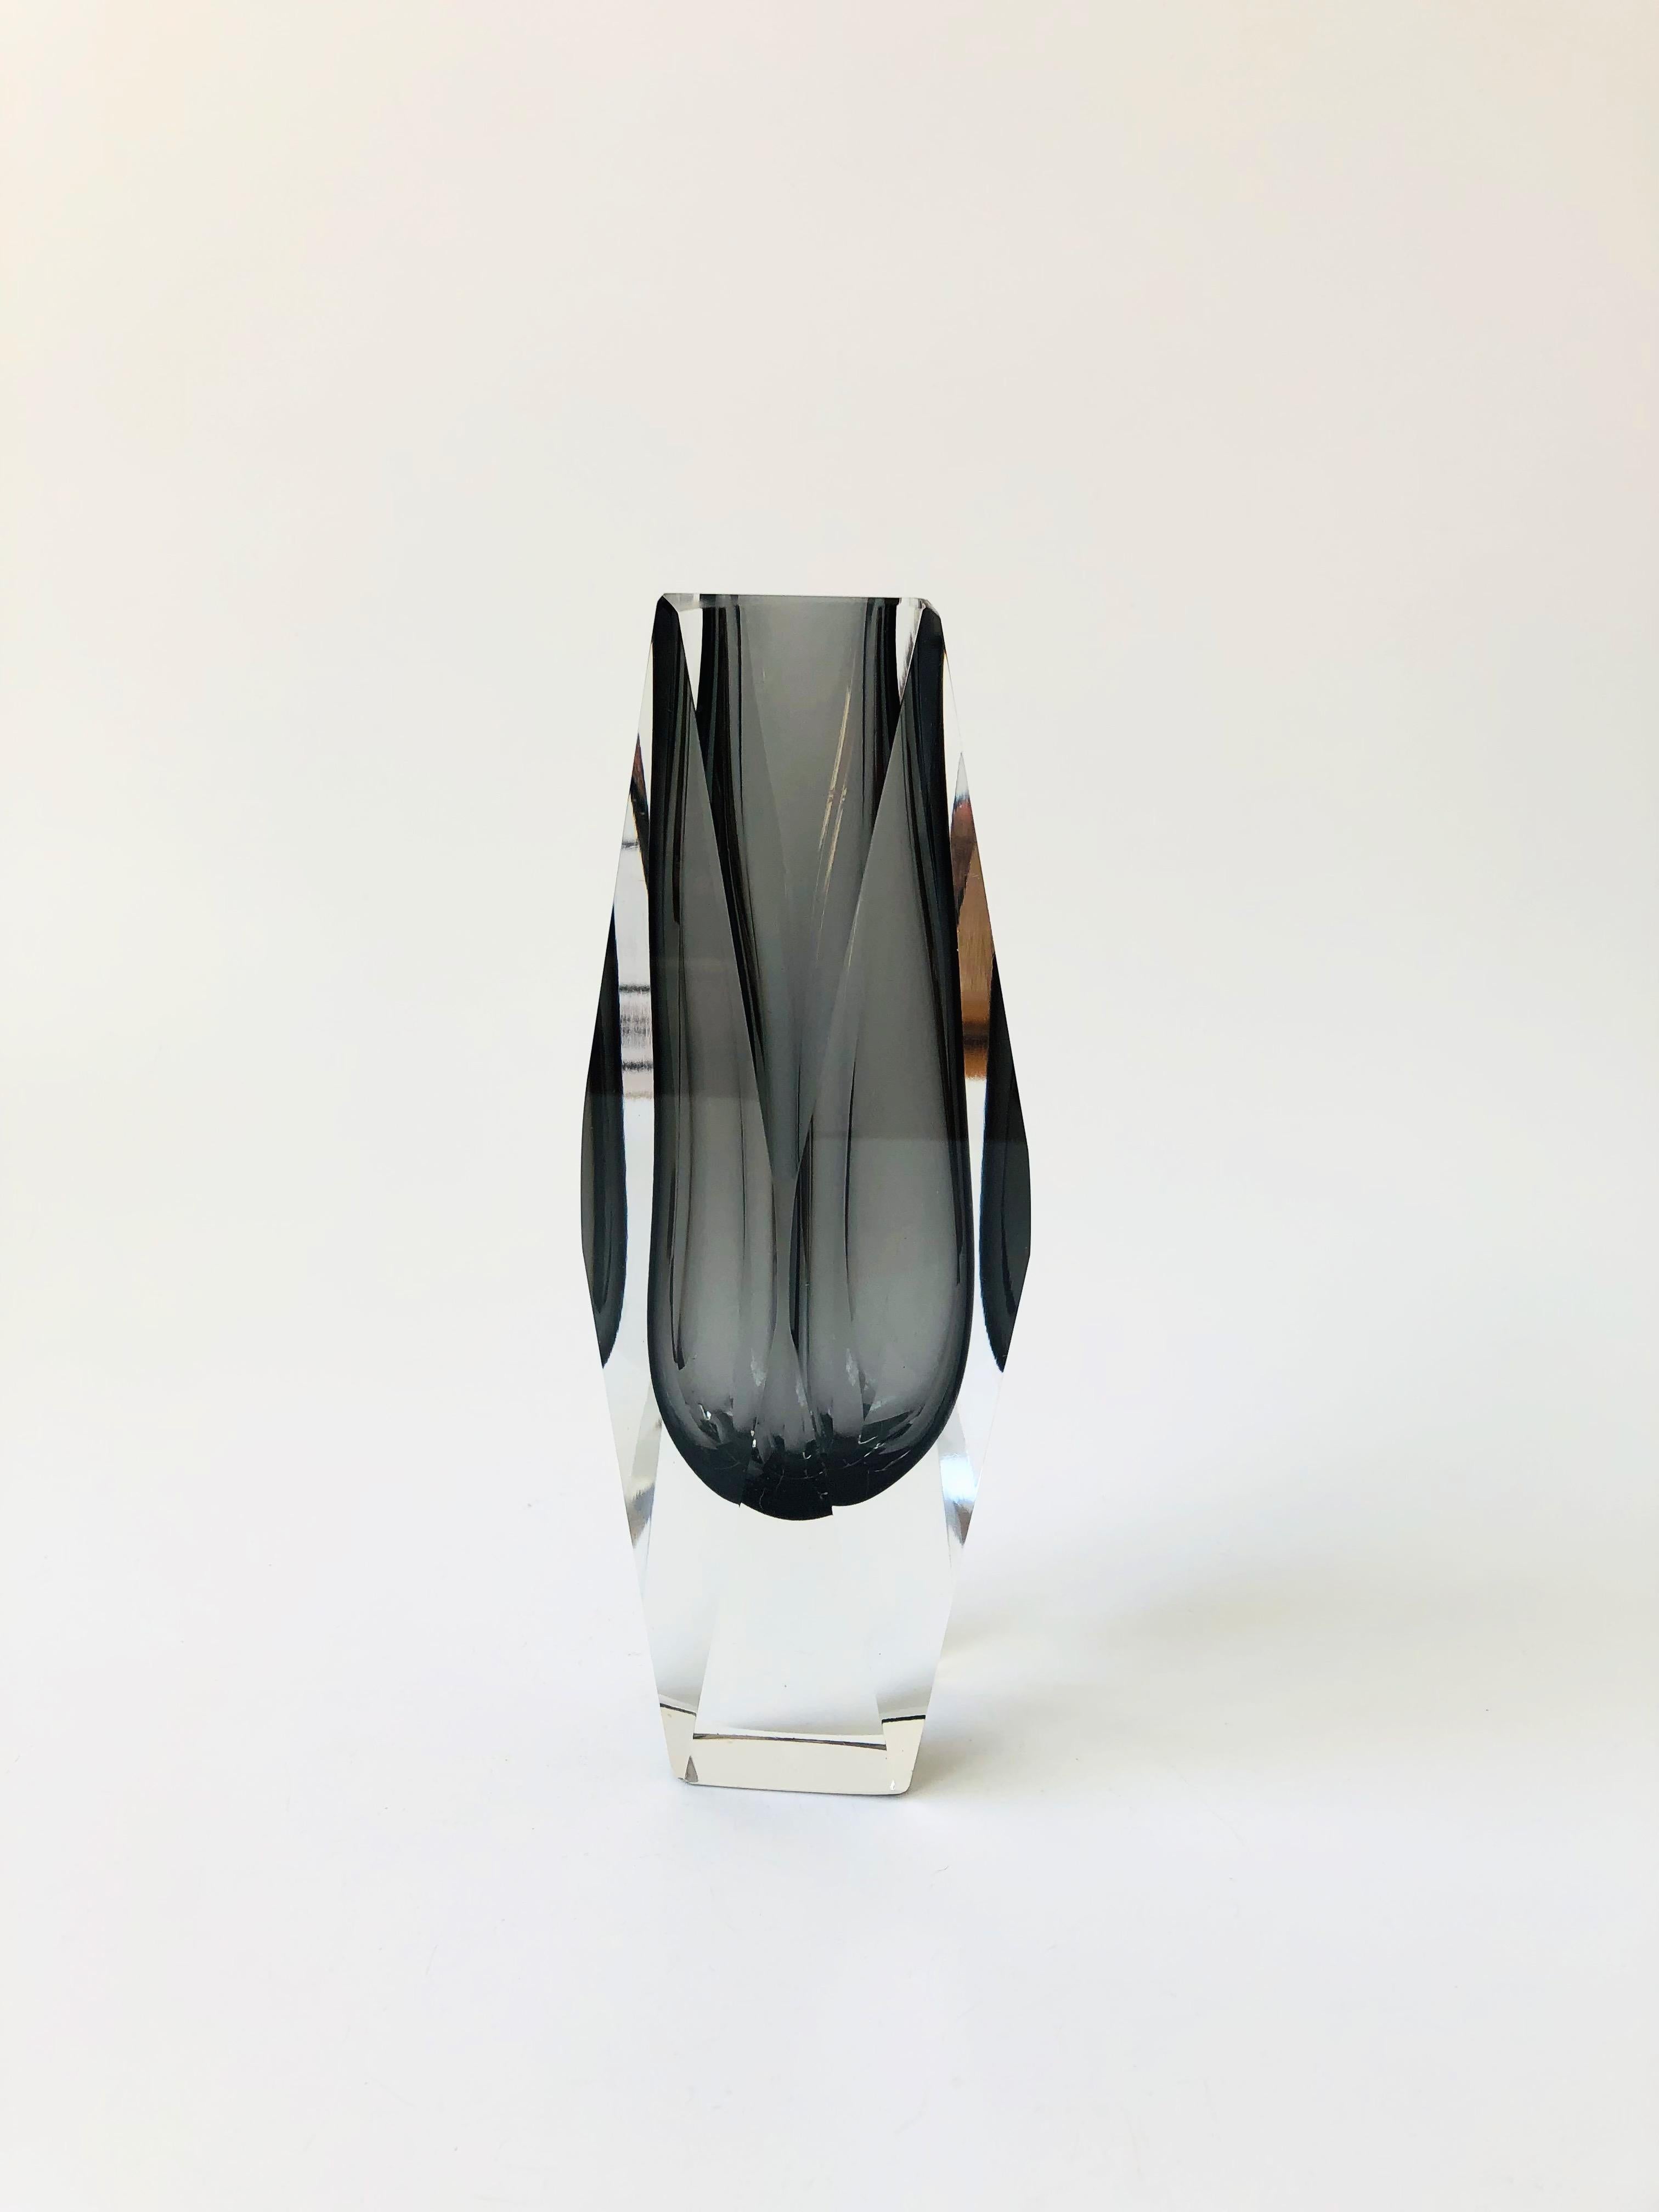 A beautiful 1970s vintage Italian art glass vase. Beautiful sommerso technique of gray glass encased in a faceted clear outer glass. Designed by Alessandro Mandruzzato for Murano.
 